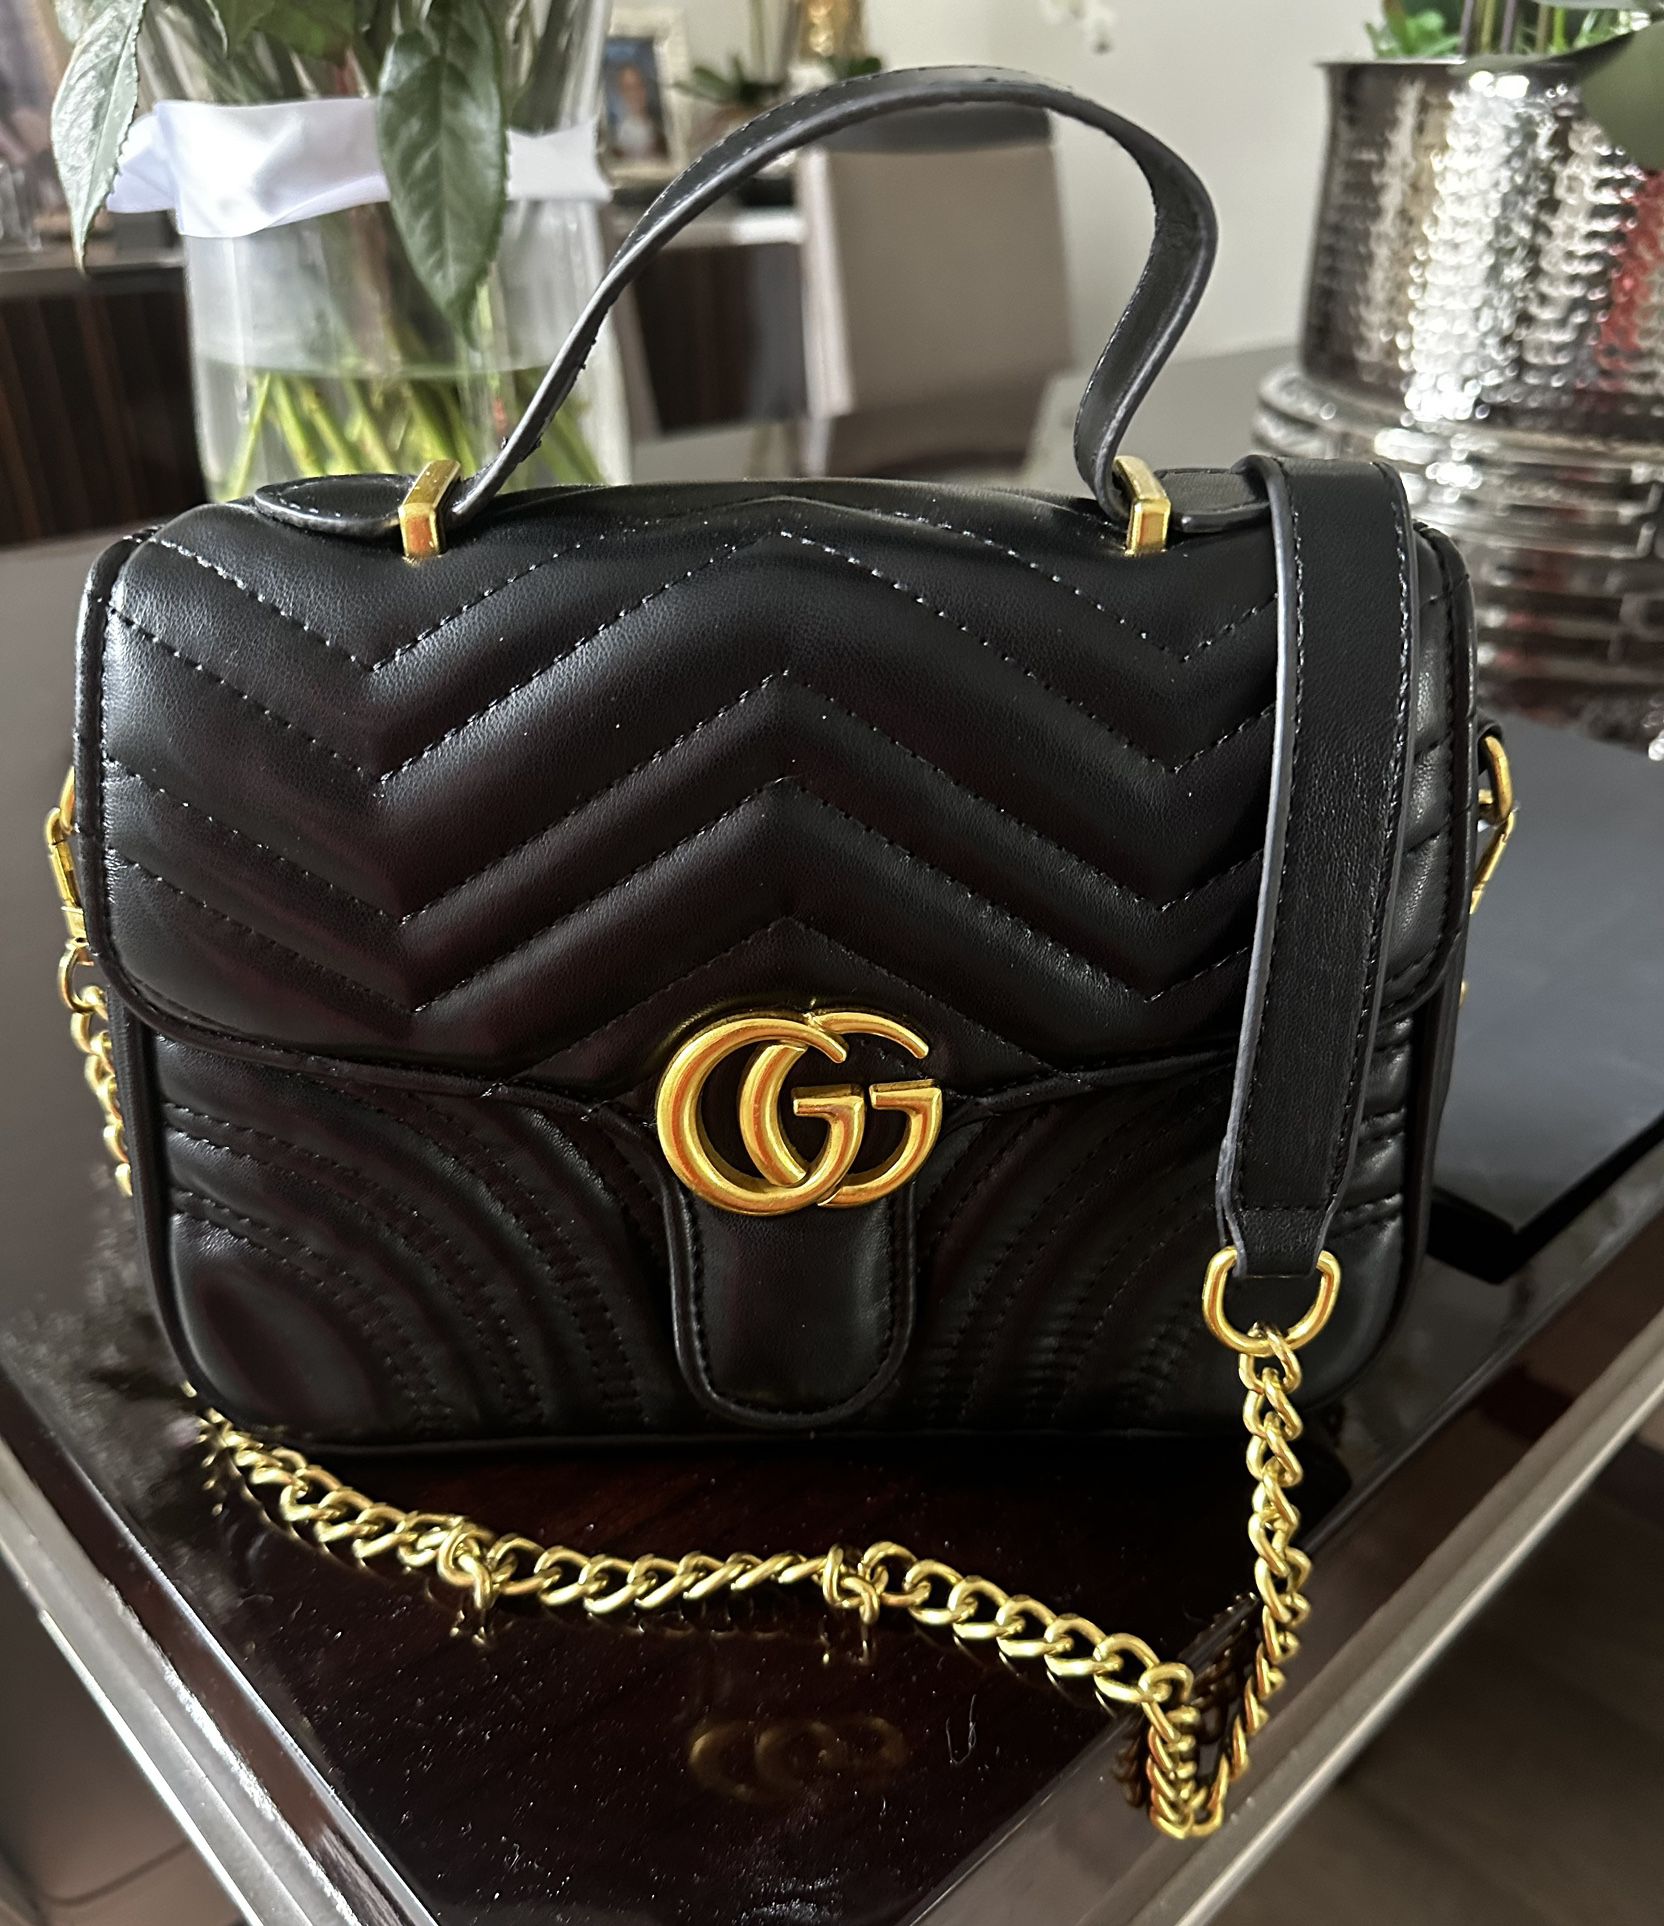 Gucci Black Leather GG Marmont Small Top Handle Bag